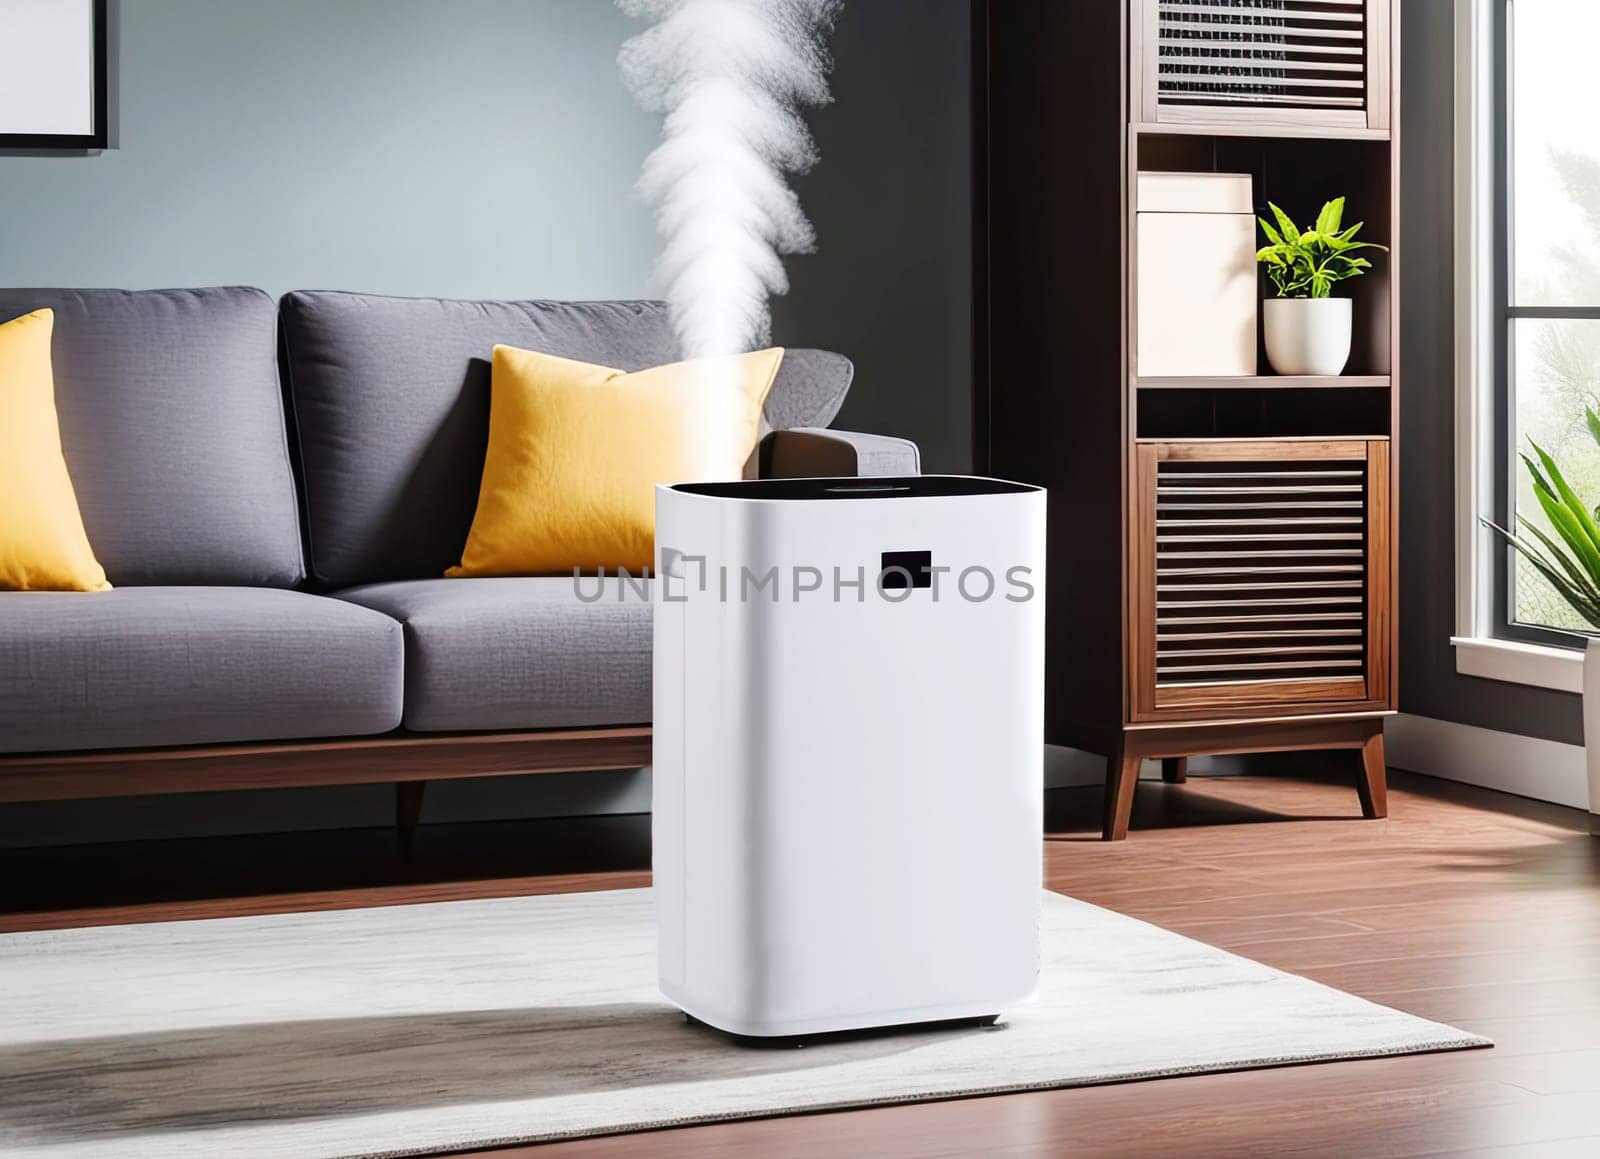 Air purifier in cozy living room for filter and cleaning removing dust for fresh air and healthy life,Air Pollution Concept